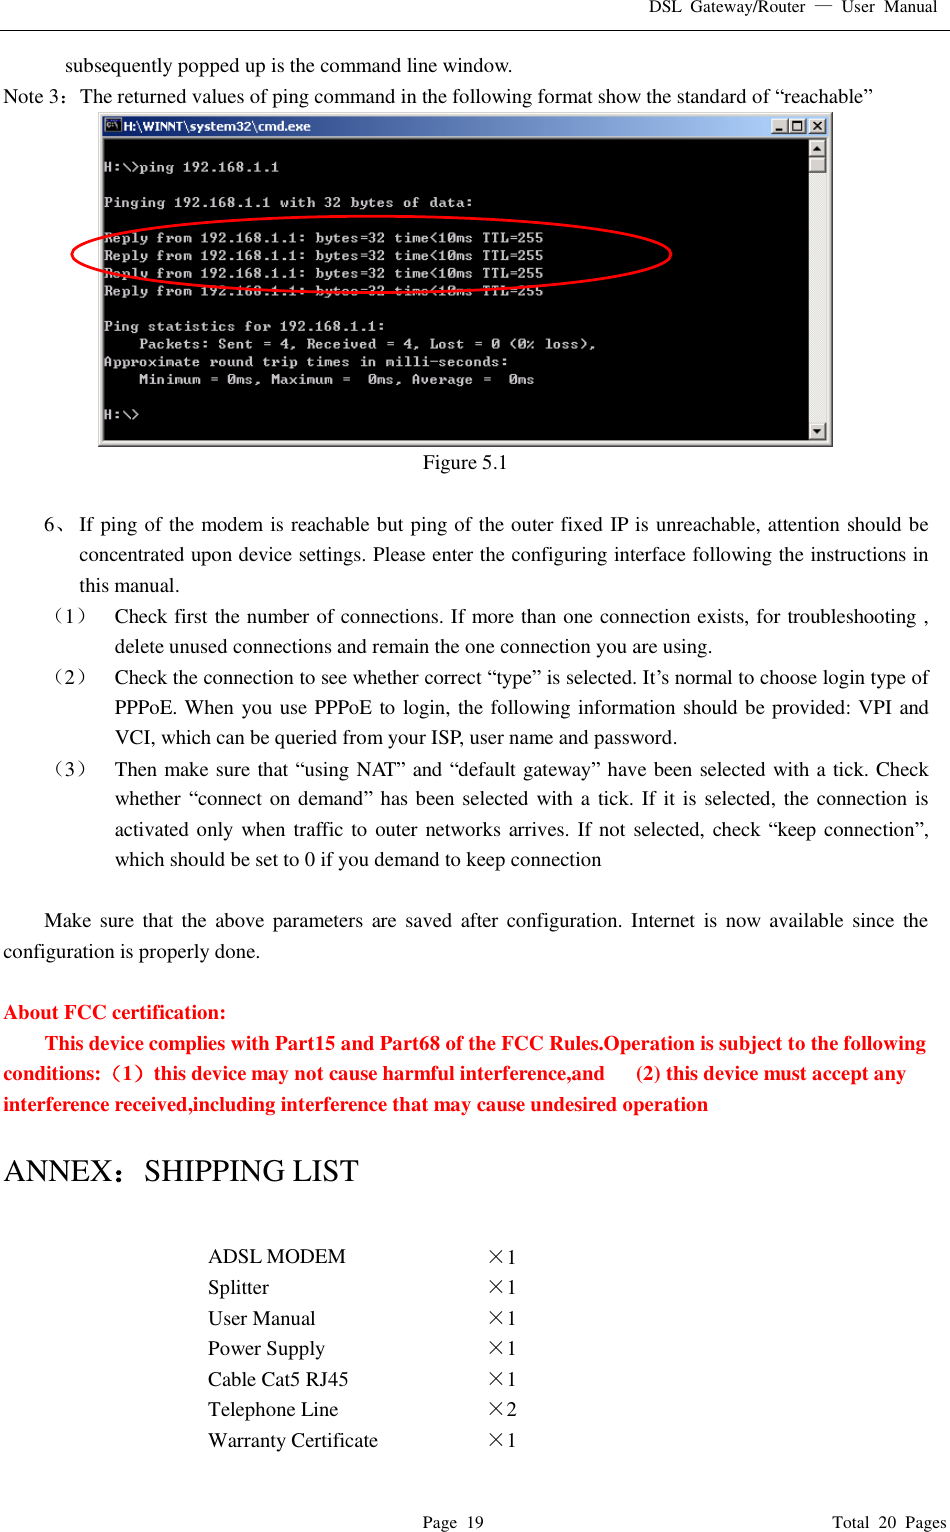 DSL Gateway/Router  — User Manual  Page 19                                       Total 20 Pages subsequently popped up is the command line window. Note 3：The returned values of ping command in the following format show the standard of “reachable”  Figure 5.1  6、 If ping of the modem is reachable but ping of the outer fixed IP is unreachable, attention should be concentrated upon device settings. Please enter the configuring interface following the instructions in this manual. （1） Check first the number of connections. If more than one connection exists, for troubleshooting , delete unused connections and remain the one connection you are using. （2） Check the connection to see whether correct “type” is selected. It’s normal to choose login type of PPPoE. When you use PPPoE to login, the following information should be provided: VPI and VCI, which can be queried from your ISP, user name and password. （3） Then make sure that “using NAT” and “default gateway” have been selected with a tick. Check whether “connect on demand” has been selected with a tick. If it is selected, the connection is activated only when traffic to outer networks arrives. If not selected, check  “keep connection”, which should be set to 0 if you demand to keep connection  Make sure that the above parameters are saved after configuration. Internet is now available since the configuration is properly done.  About FCC certification:  This device complies with Part15 and Part68 of the FCC Rules.Operation is subject to the following conditions:（1）this device may not cause harmful interference,and   (2) this device must accept any interference received,including interference that may cause undesired operation  ANNEX：SHIPPING LIST  ADSL MODEM  ×1  Splitter  ×1  User Manual  ×1  Power Supply  ×1  Cable Cat5 RJ45  ×1  Telephone Line  ×2  Warranty Certificate  ×1  